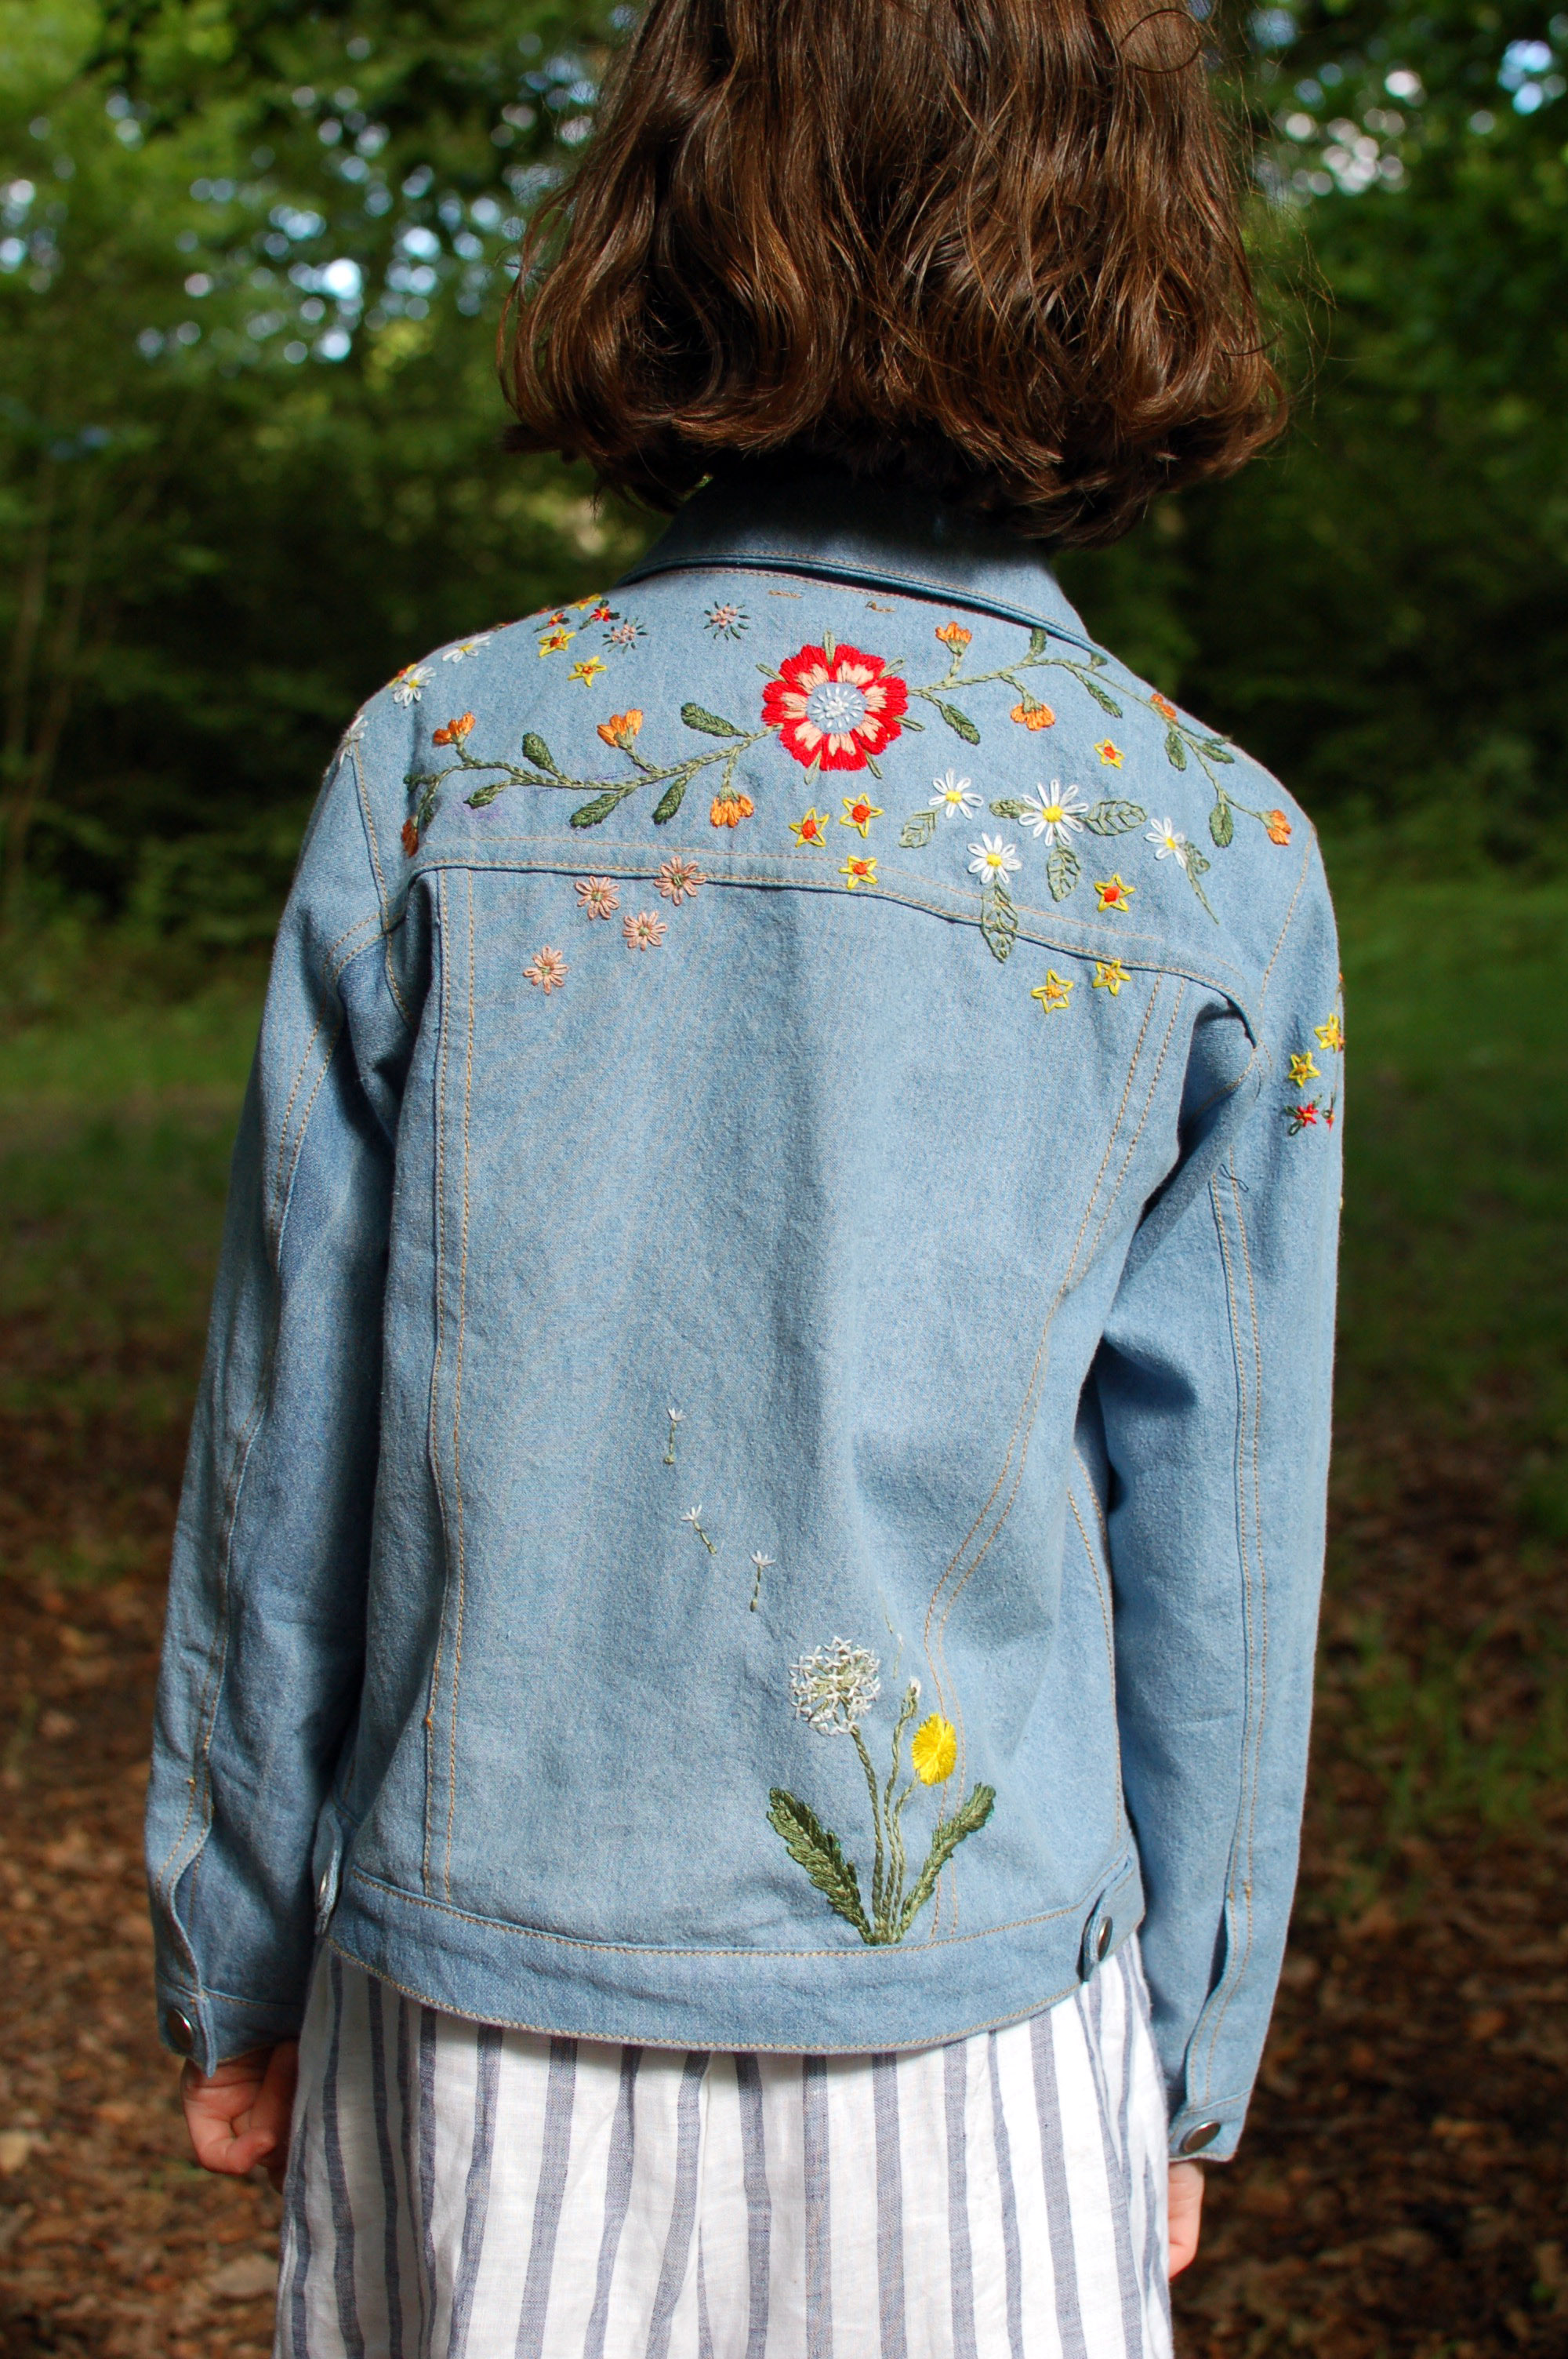 Embroidered denim jacket – Made by Toya